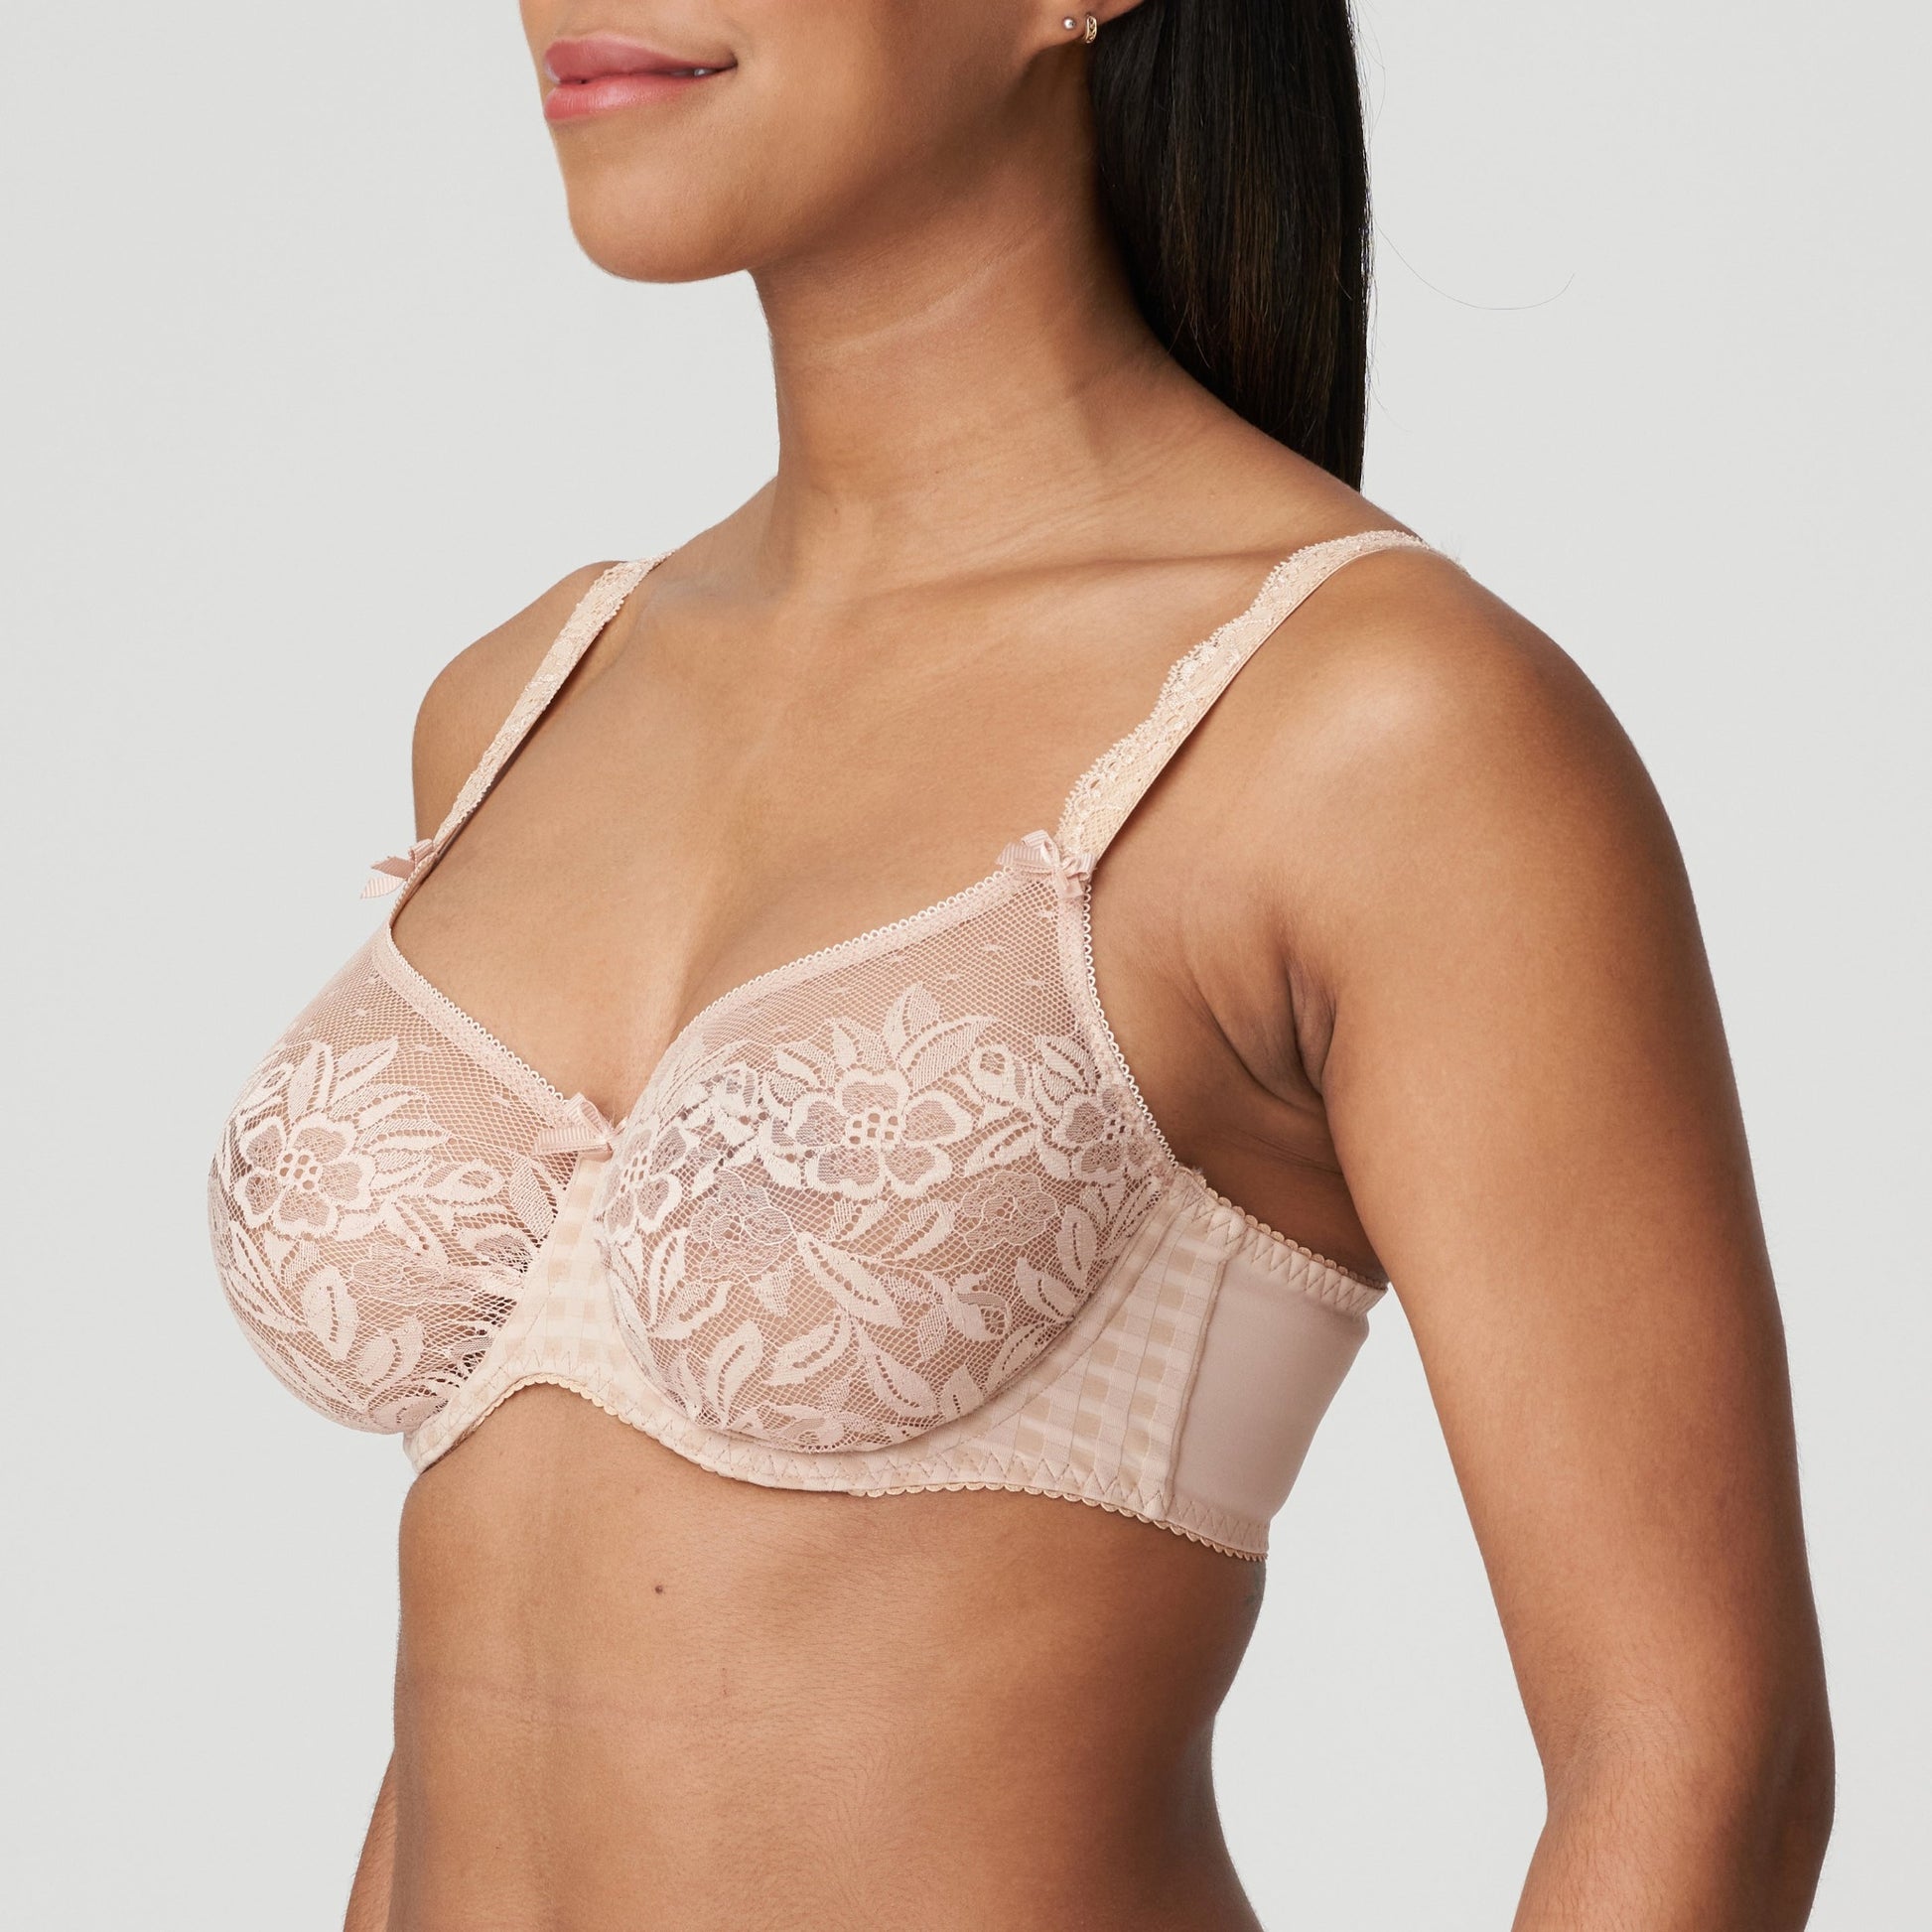 Side view of a woman wearing the Madison Unpadded Seamless T-Shirt Bra in Caffe Latte by PrimaDonna.